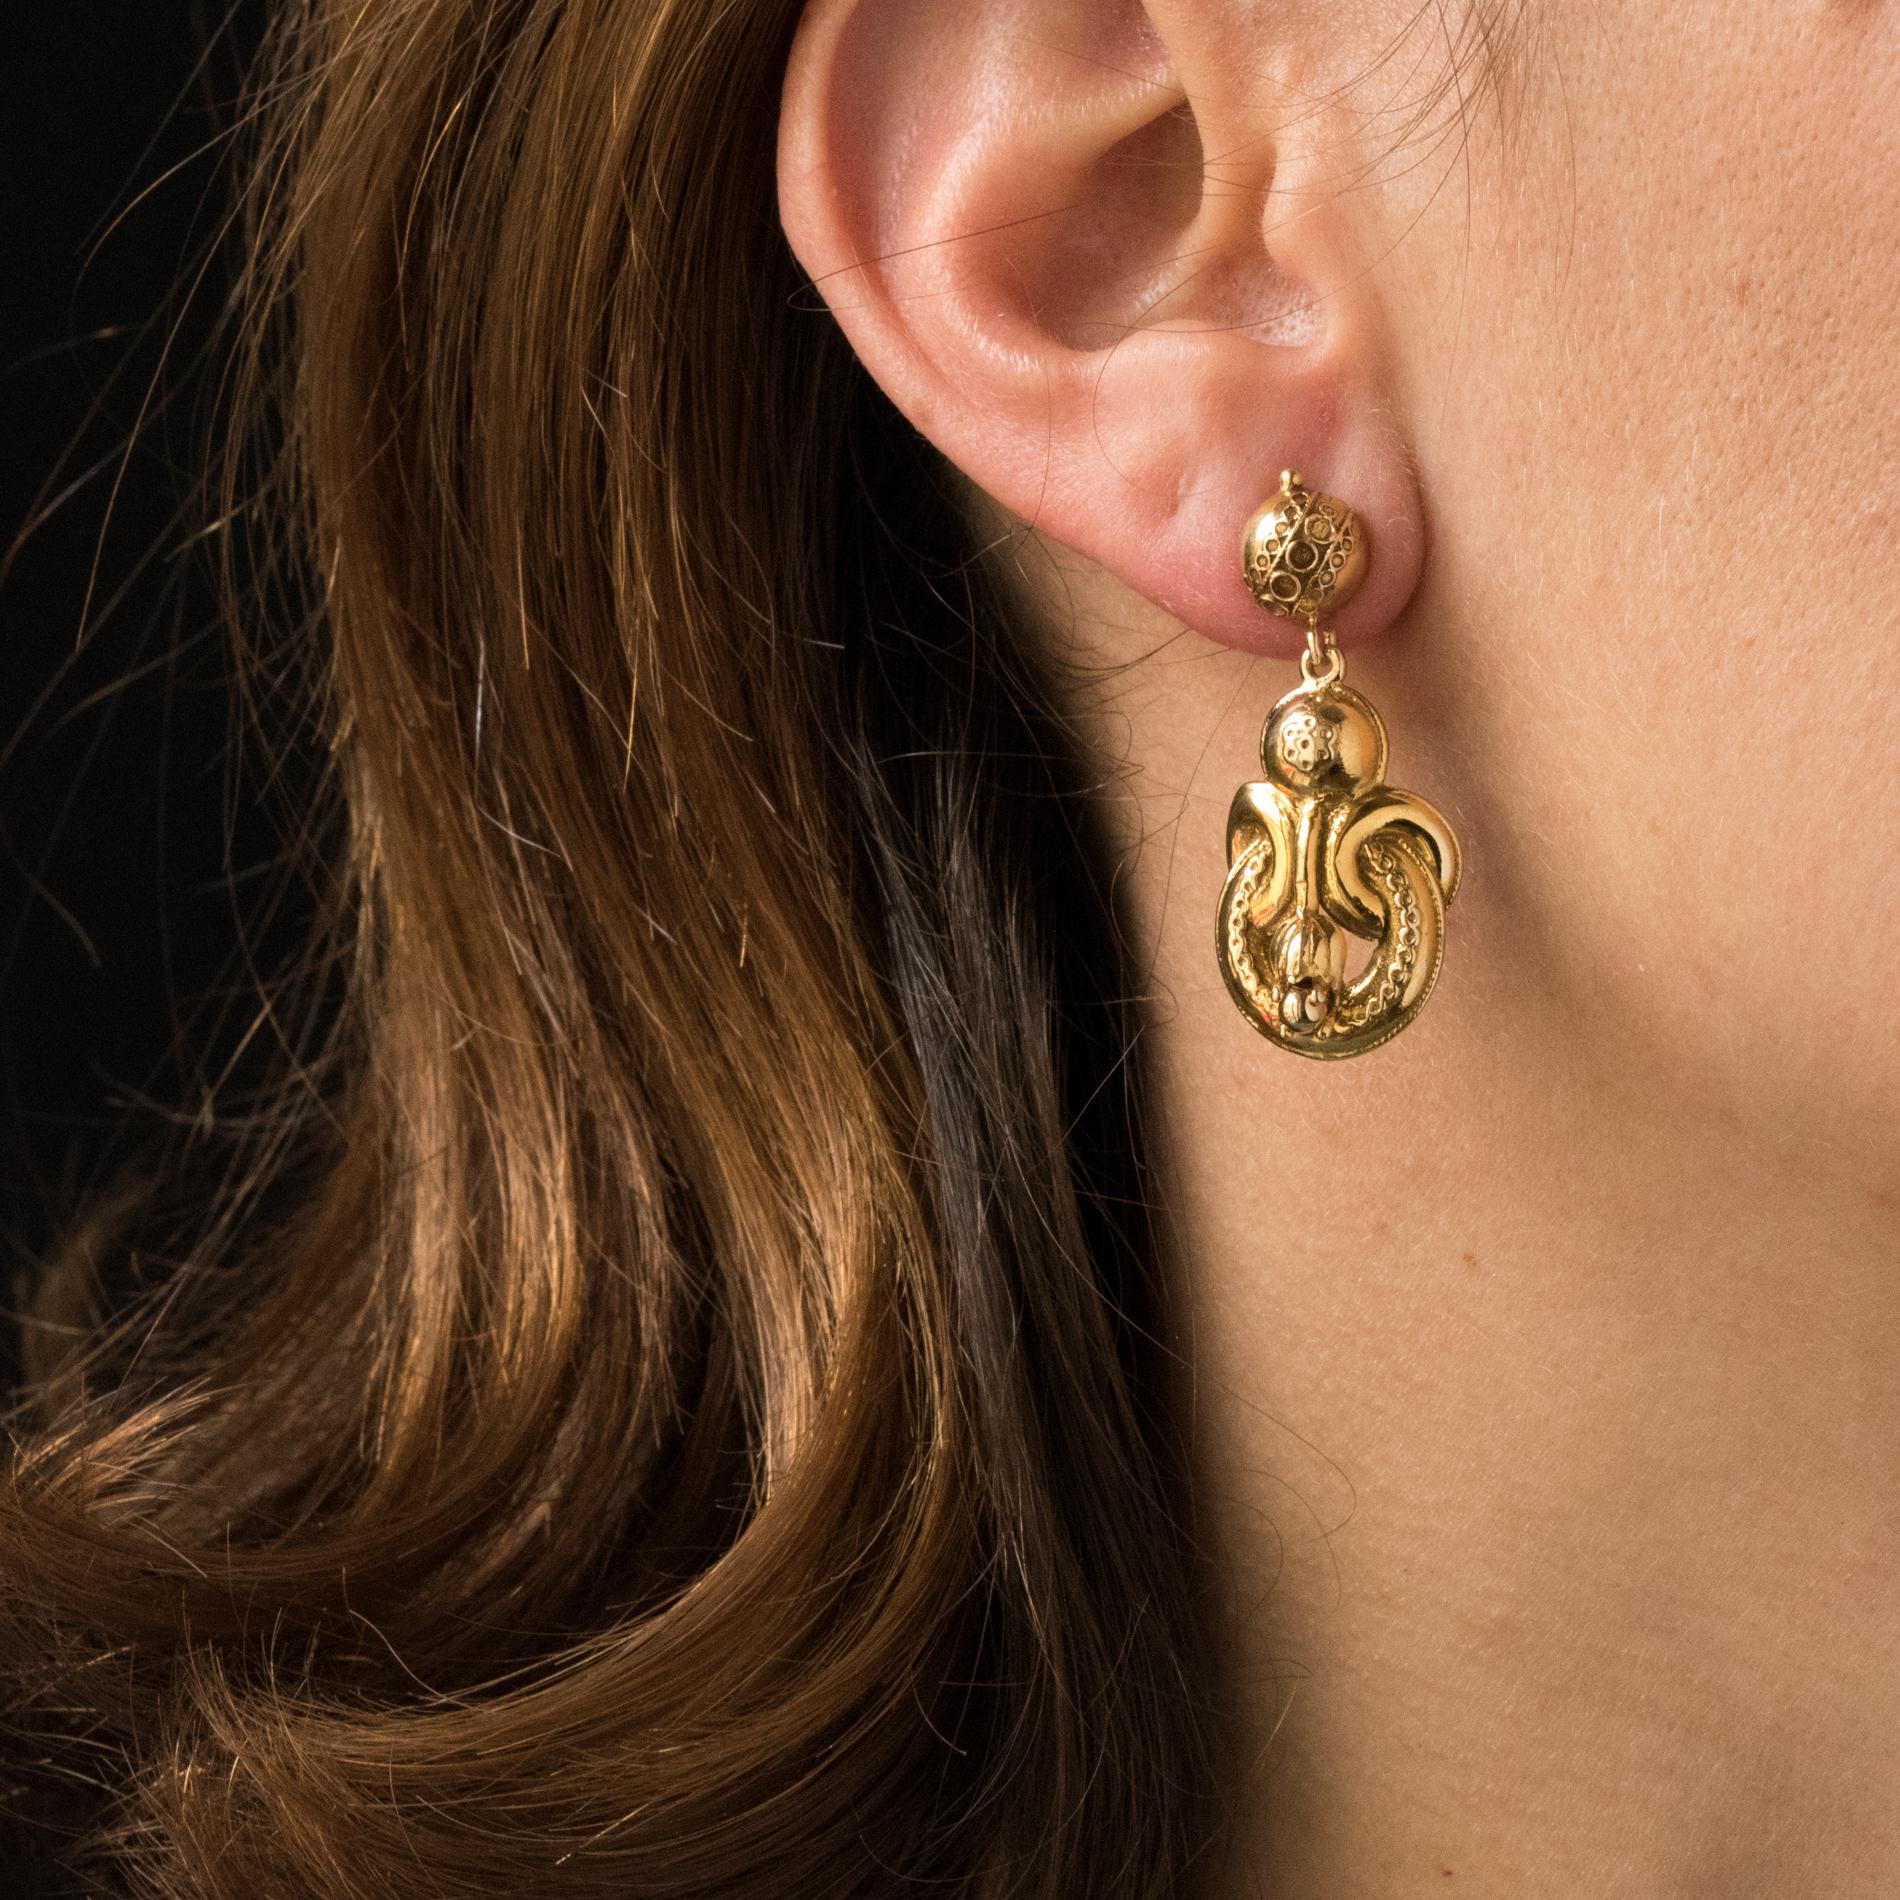 Earrings in 14 karats yellow gold.
Dangle earrings, they are composed of a half pearl of gold, chiselled, which retains in pendent a chiselled pattern adorned with vegetal and floral decoration. The clasp is a butterfly.
Length: 3.5 cm, width: 1.5